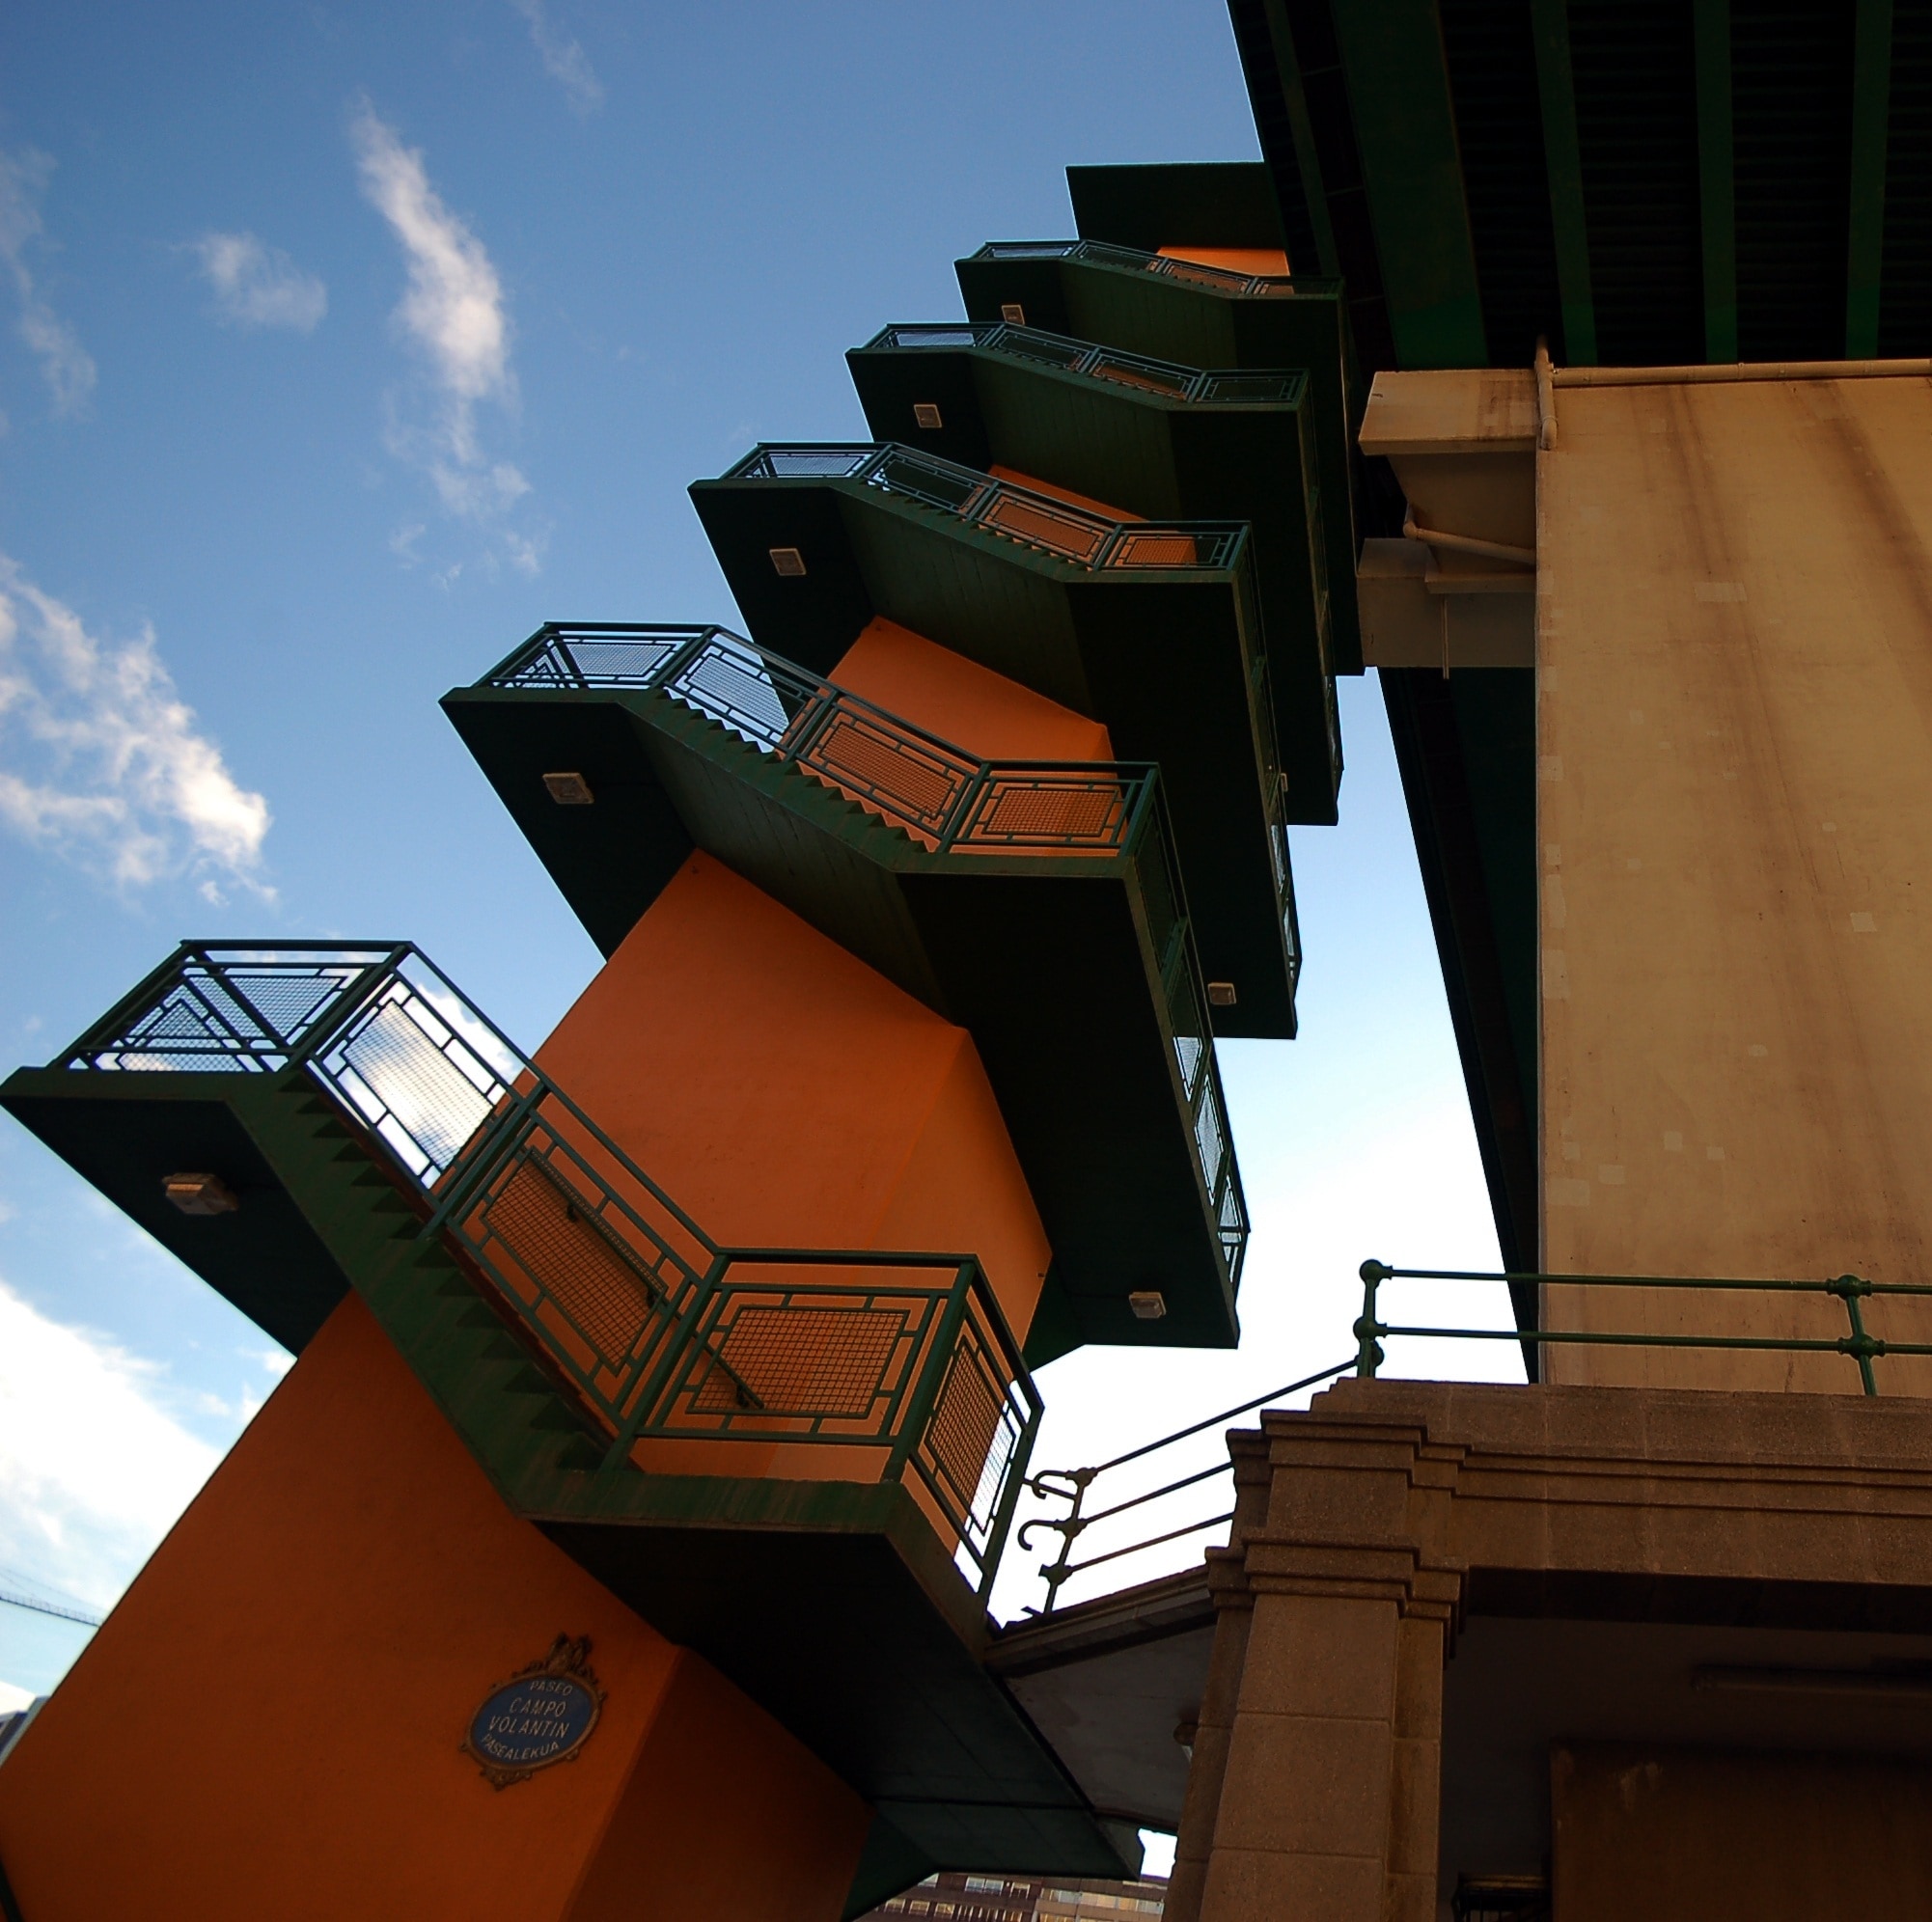 orange and green mid rise building with 5 tier stairway during daytime